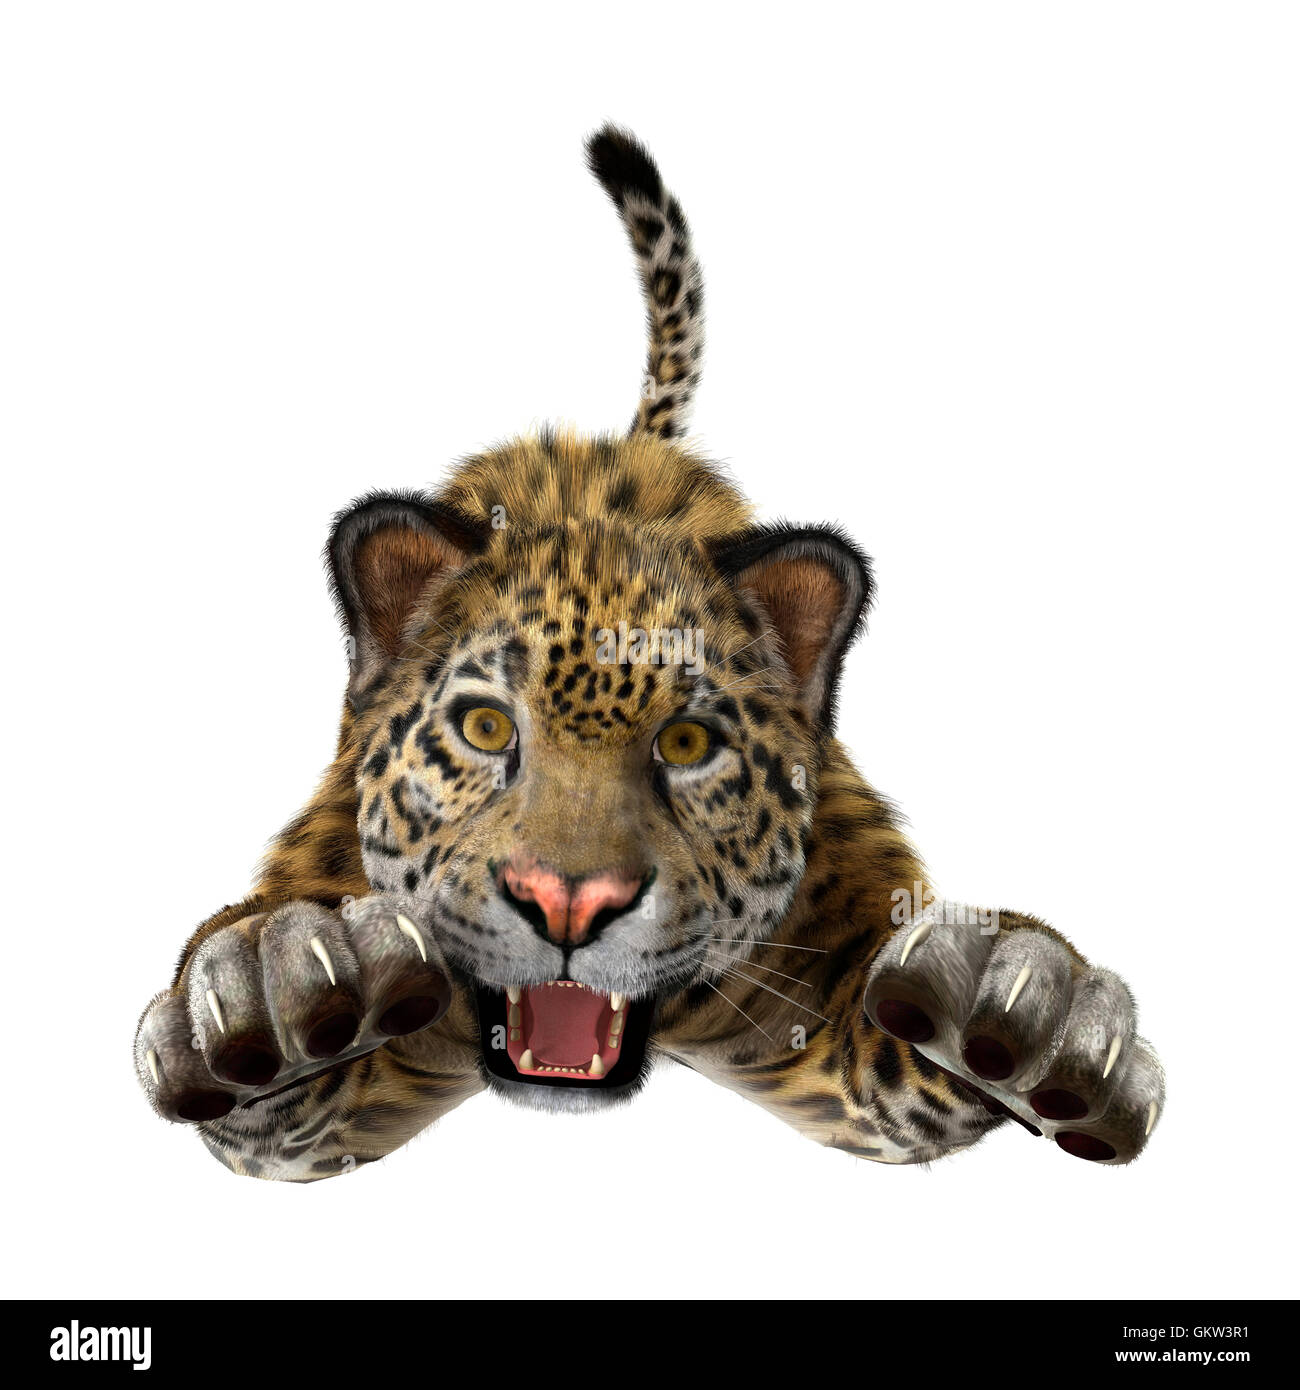 3D rendering of a big cat jaguar isolated on white background Stock Photo